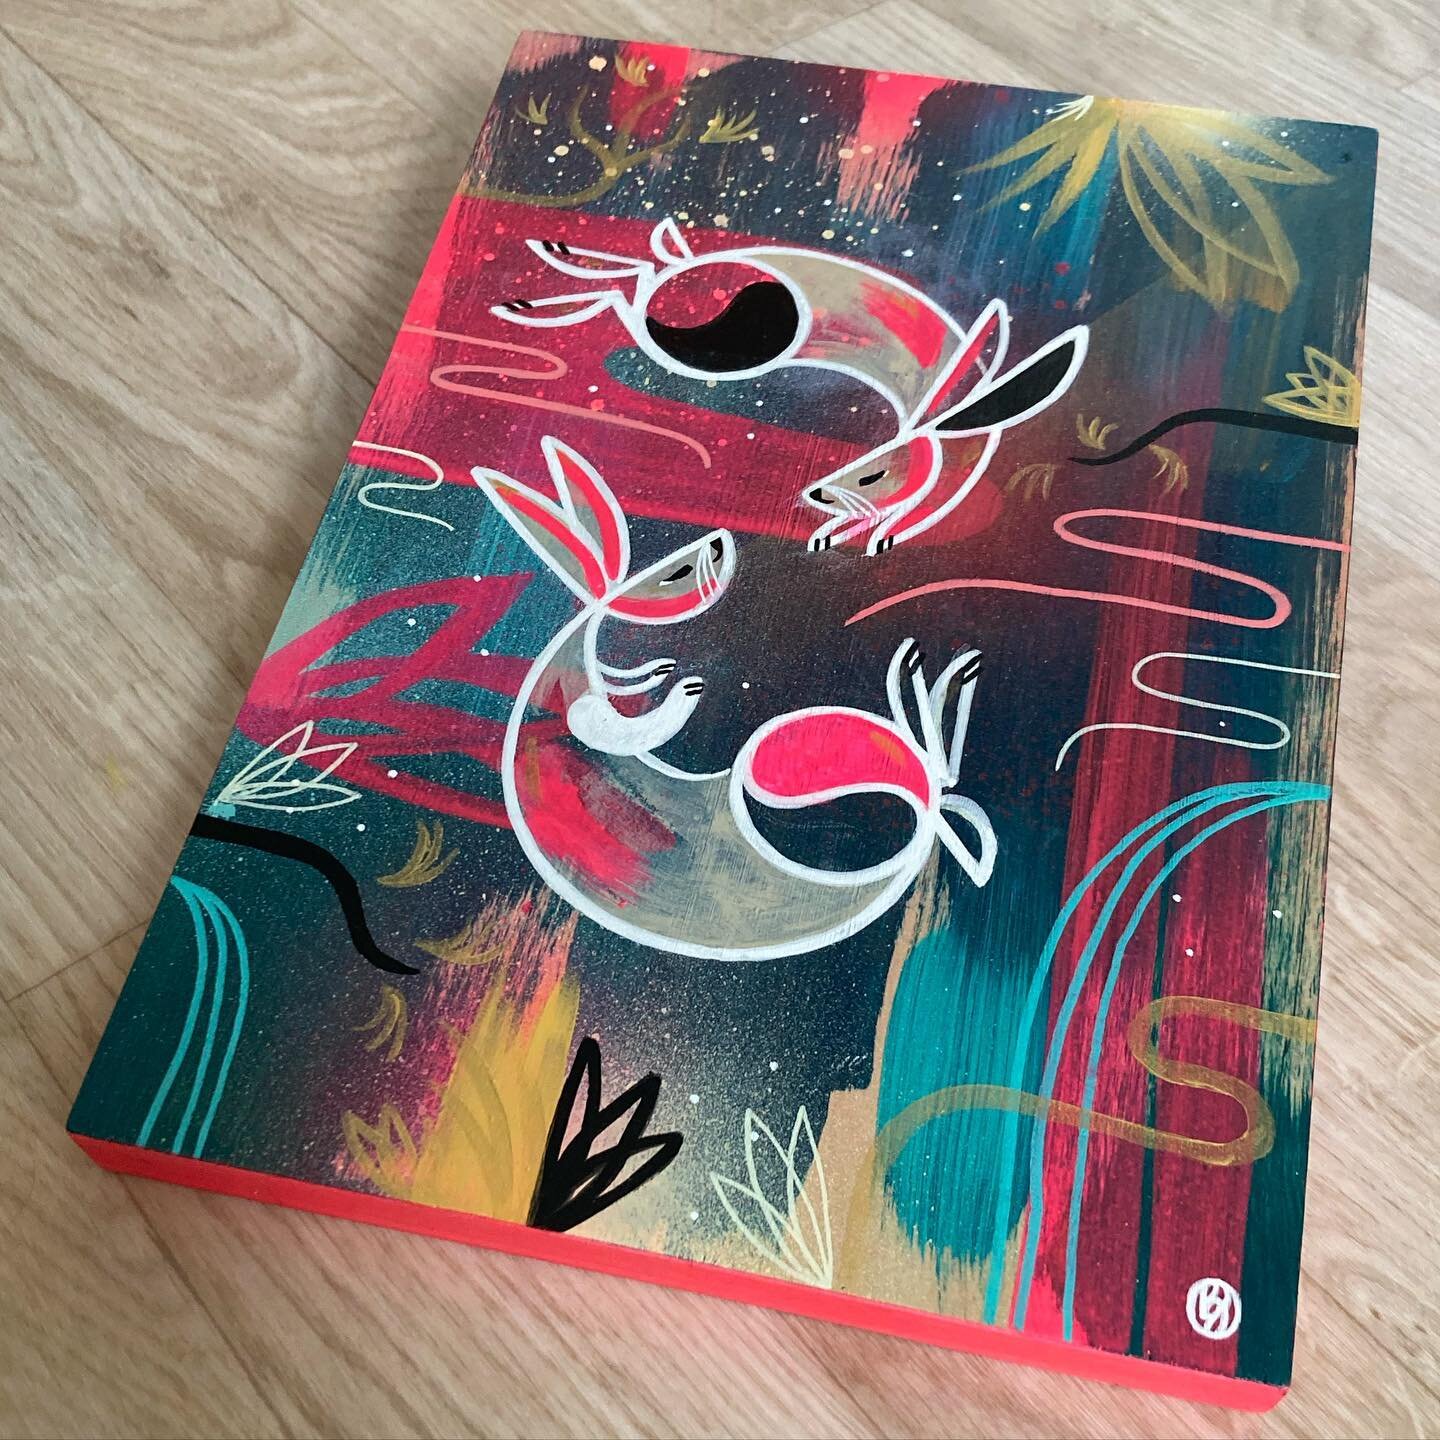 &ldquo;Hop, Skip&rdquo; 
I was pleased with the colour combinations in this recent piece - the darker background with pink splashes 💥 It&rsquo;s now up in my shop (see link in bio) 🙏

#rabbitlover #rabbits #tworabbits #rabbitpainting #hopskip #wild